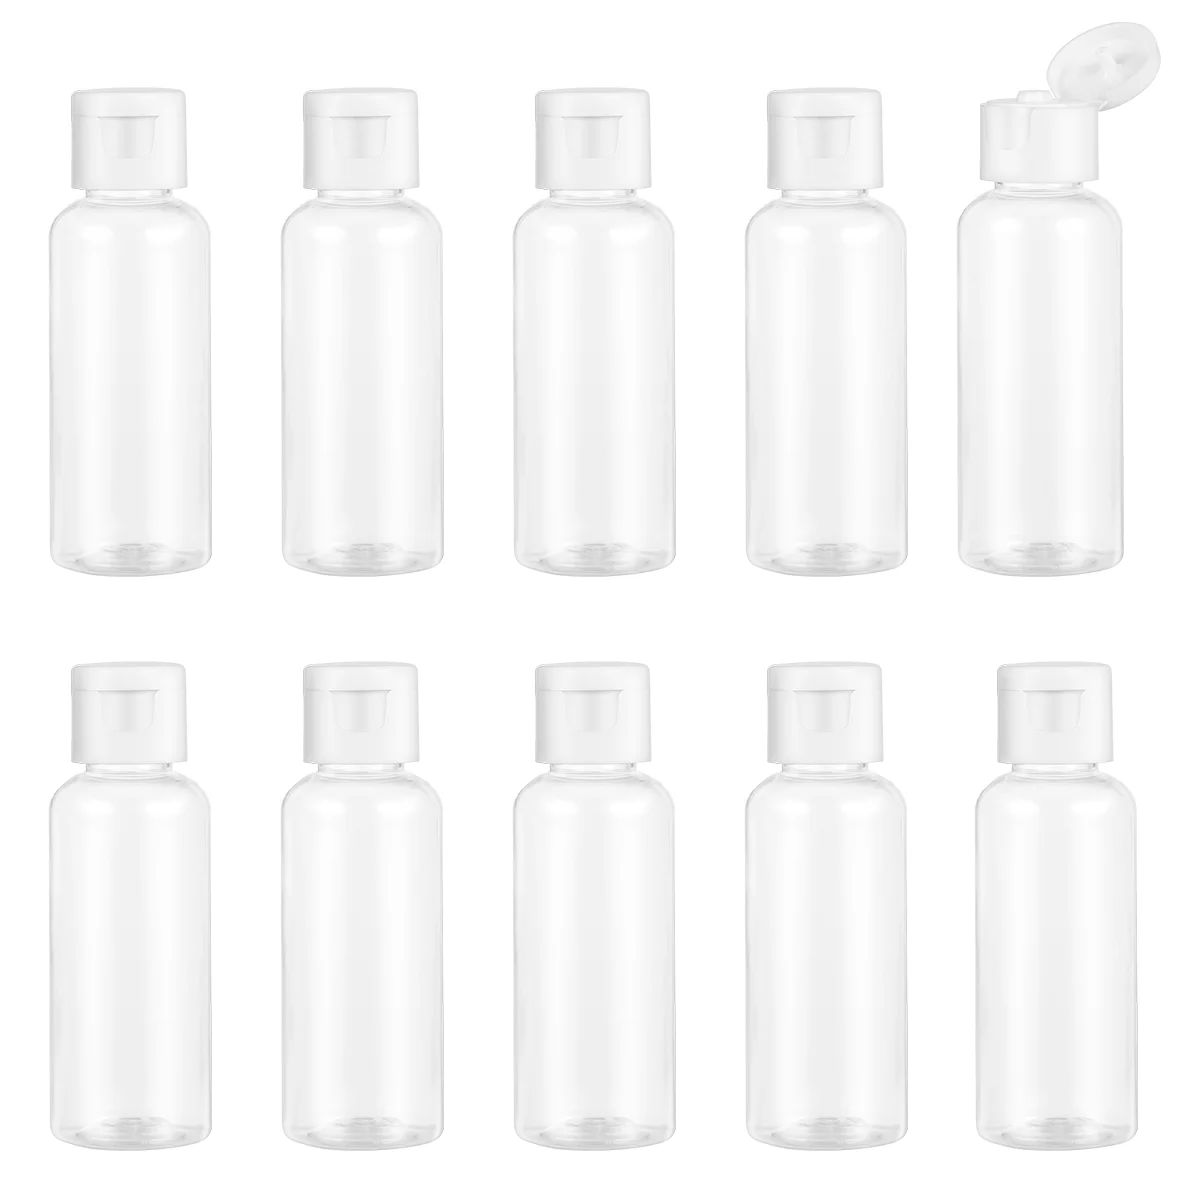 Plastic Travel Flask Refillable Travel Bottle Liquid Cosmetics Containers Shampoo Cream For Travel